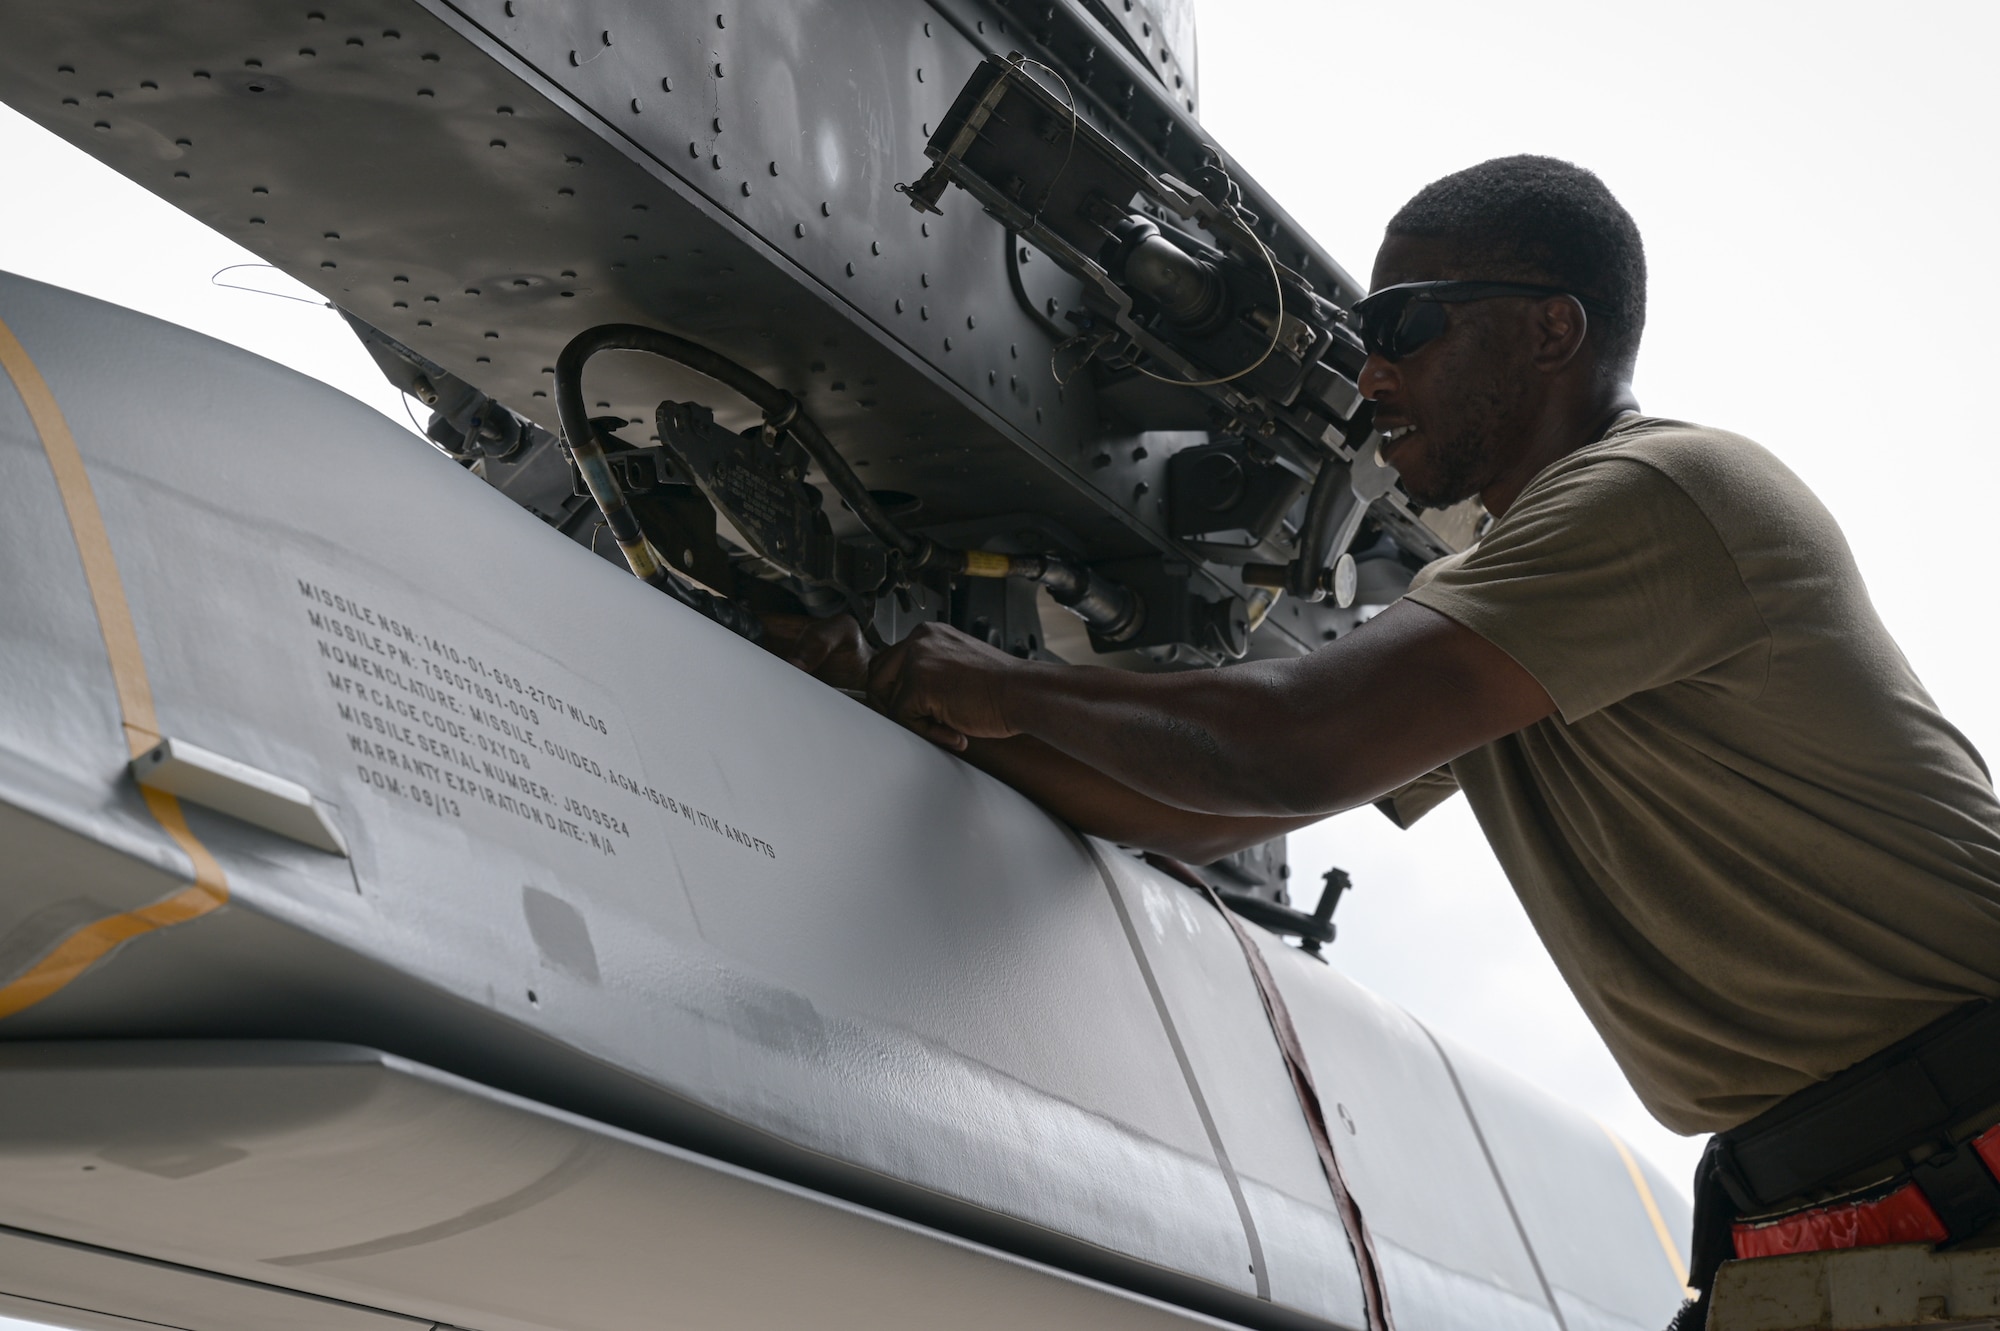 Staff Sgt. Schnathan Johnson, 96th Aircraft Maintenance Unit weapons load team chief, inspects a AGM-158 munition to verify its properly fastened onto a B-52H Stratofortress during Combat Hammer at Barksdale Air Force Base, Louisiana, June 7, 2022. Airmen from the 96th AMU loaded and employed nearly 6 types of various munitions and flew a total of eight sorties in support of exercise Combat Hammer. (U.S. Air Force photo by Senior Airman Jonathan E. Ramos)